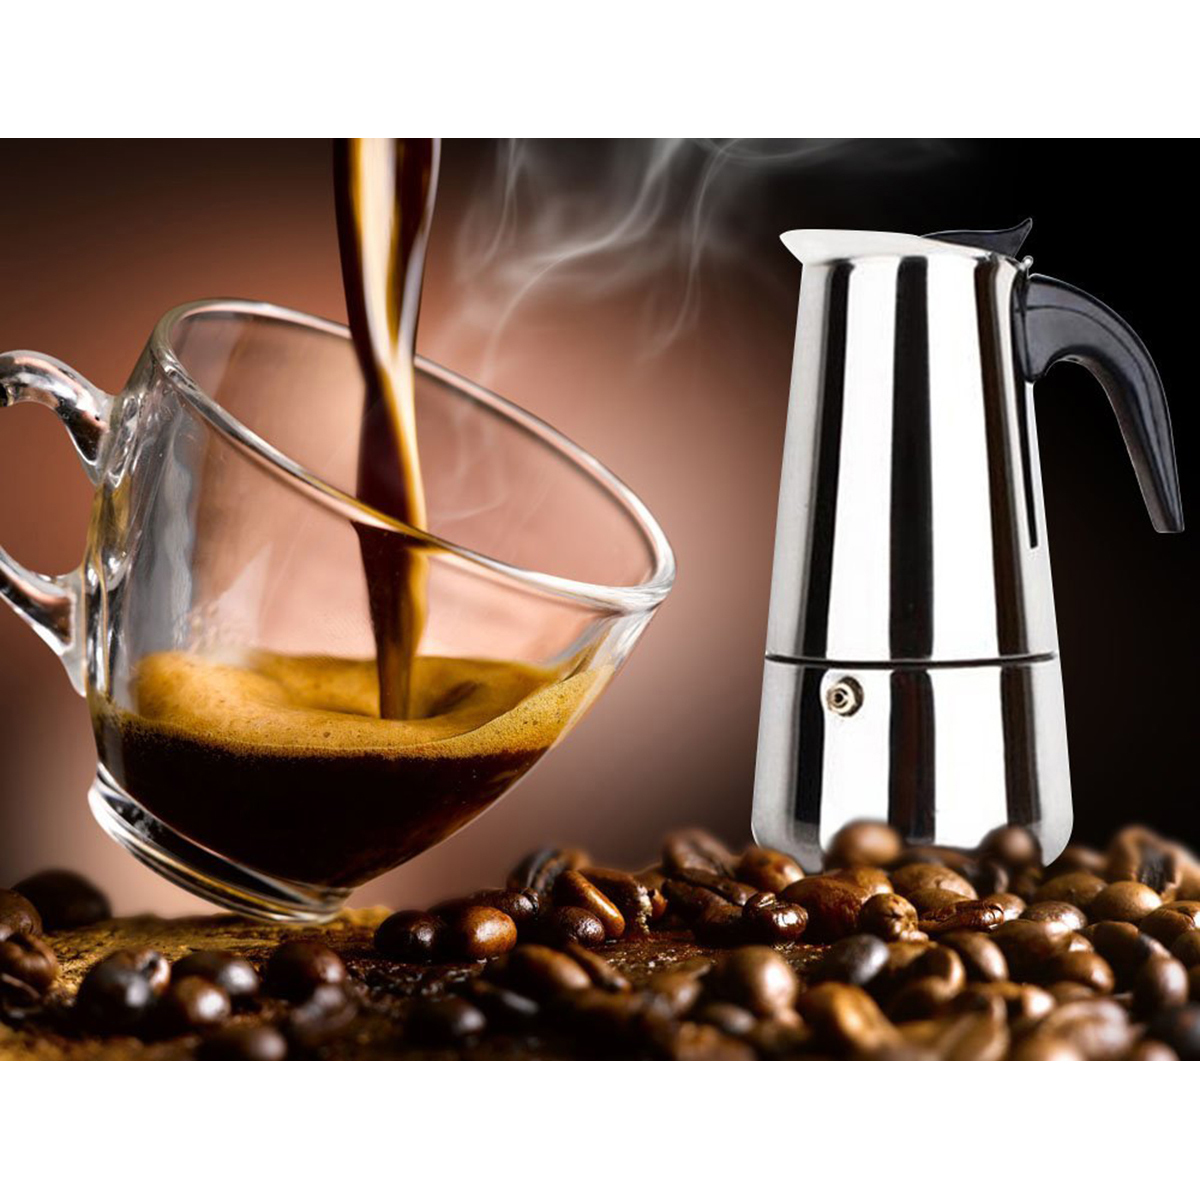 Espresso Moka Coffee Maker Pot Percolator Stainless Steel Electric Stove Electric Coffee Kettle 20